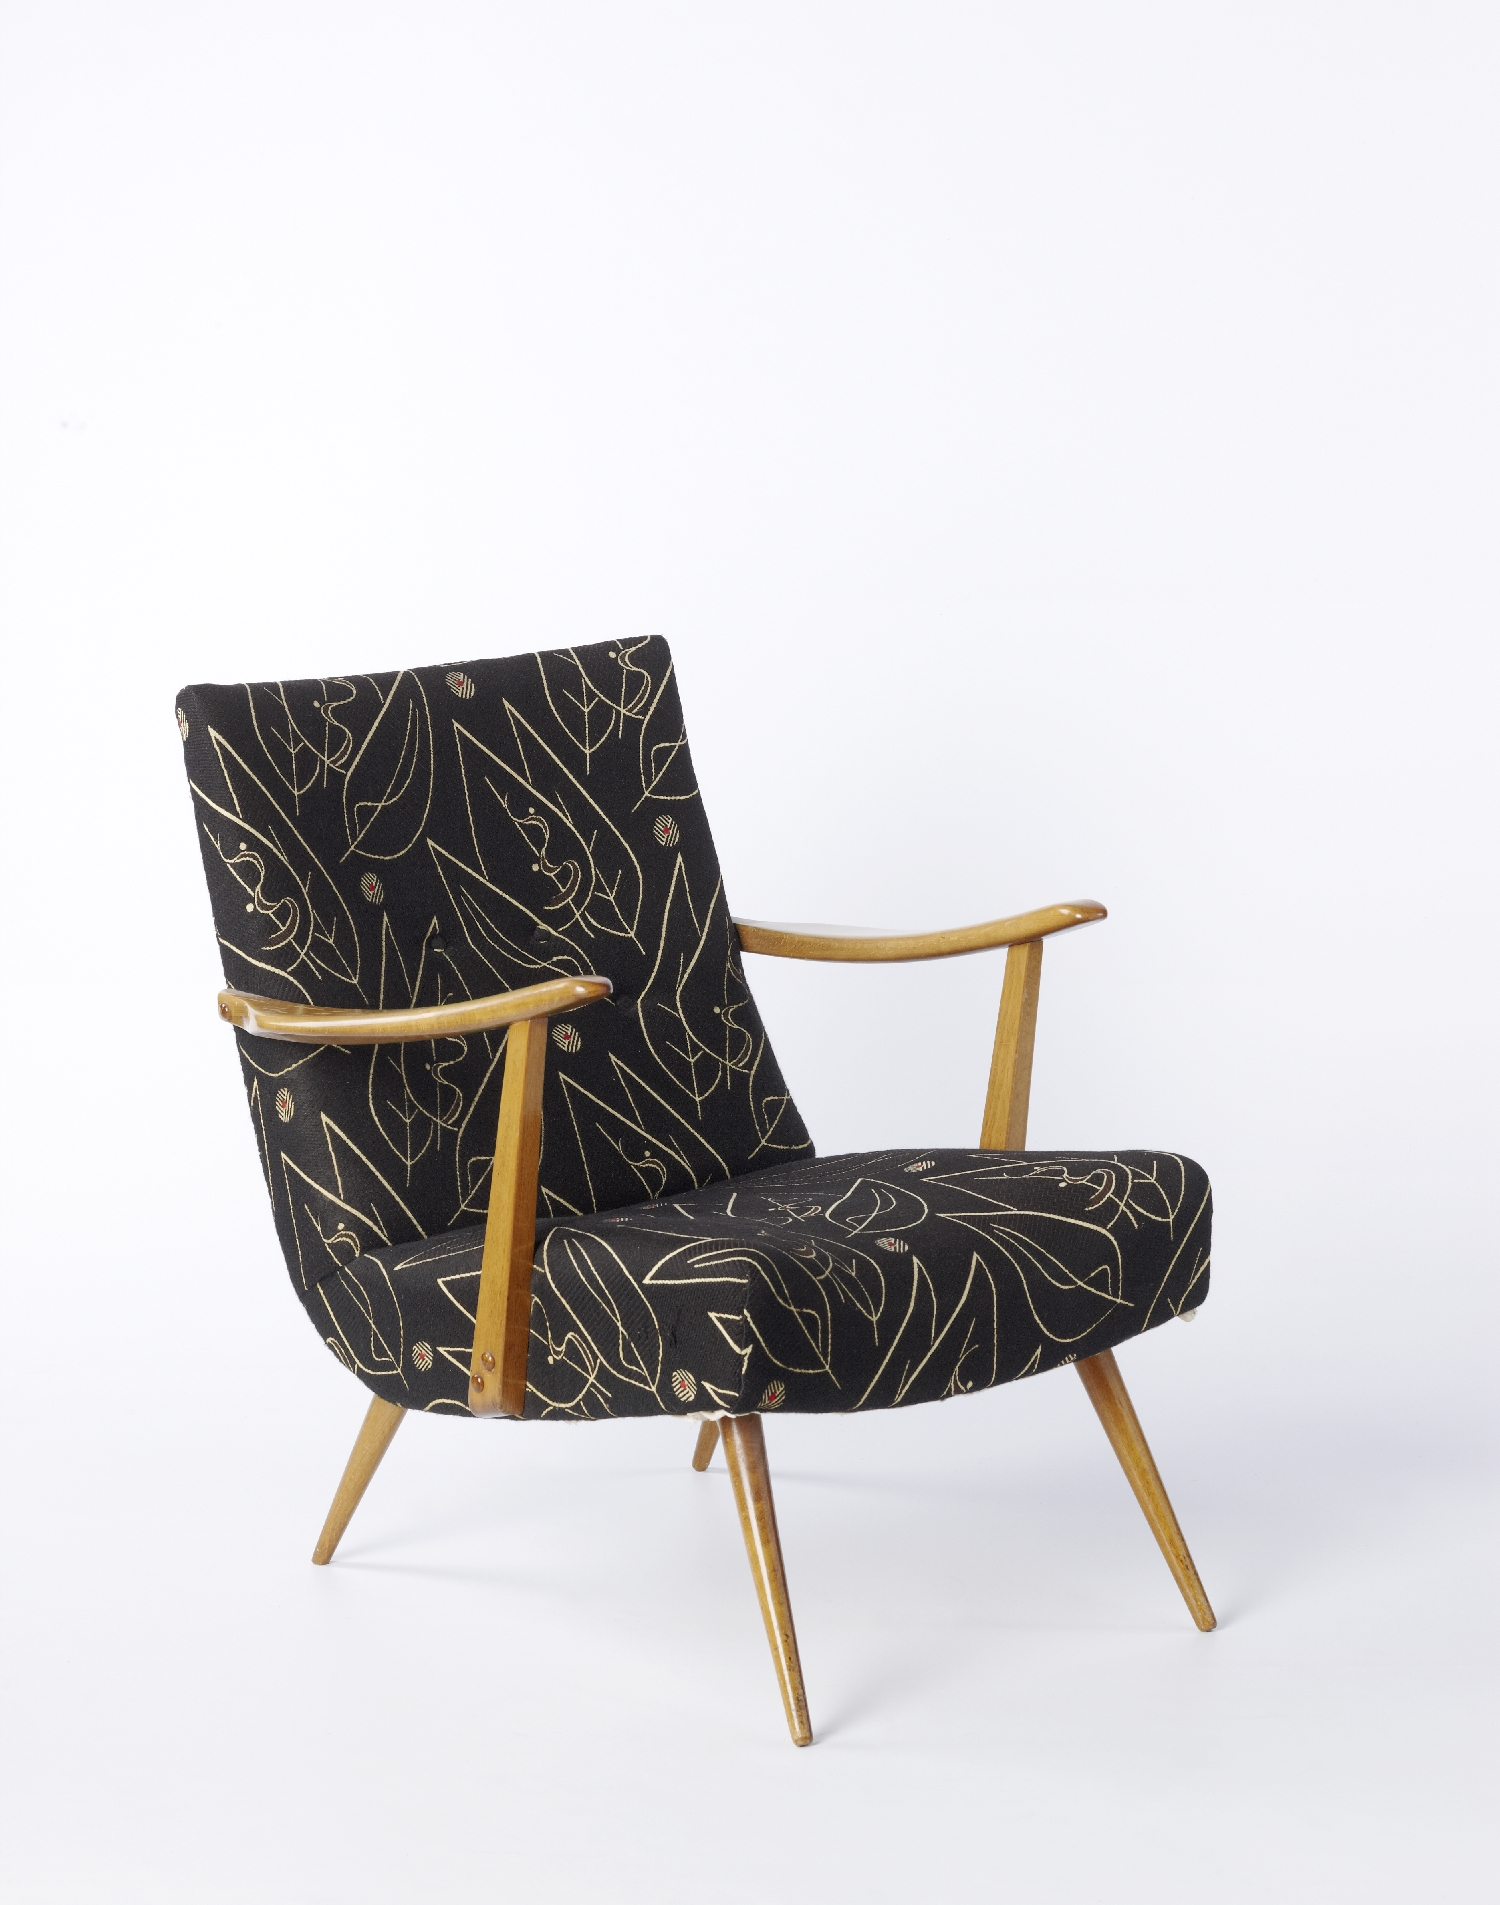 Easy chair, 1950s, wood, fabric, inv. no. 2117-2011